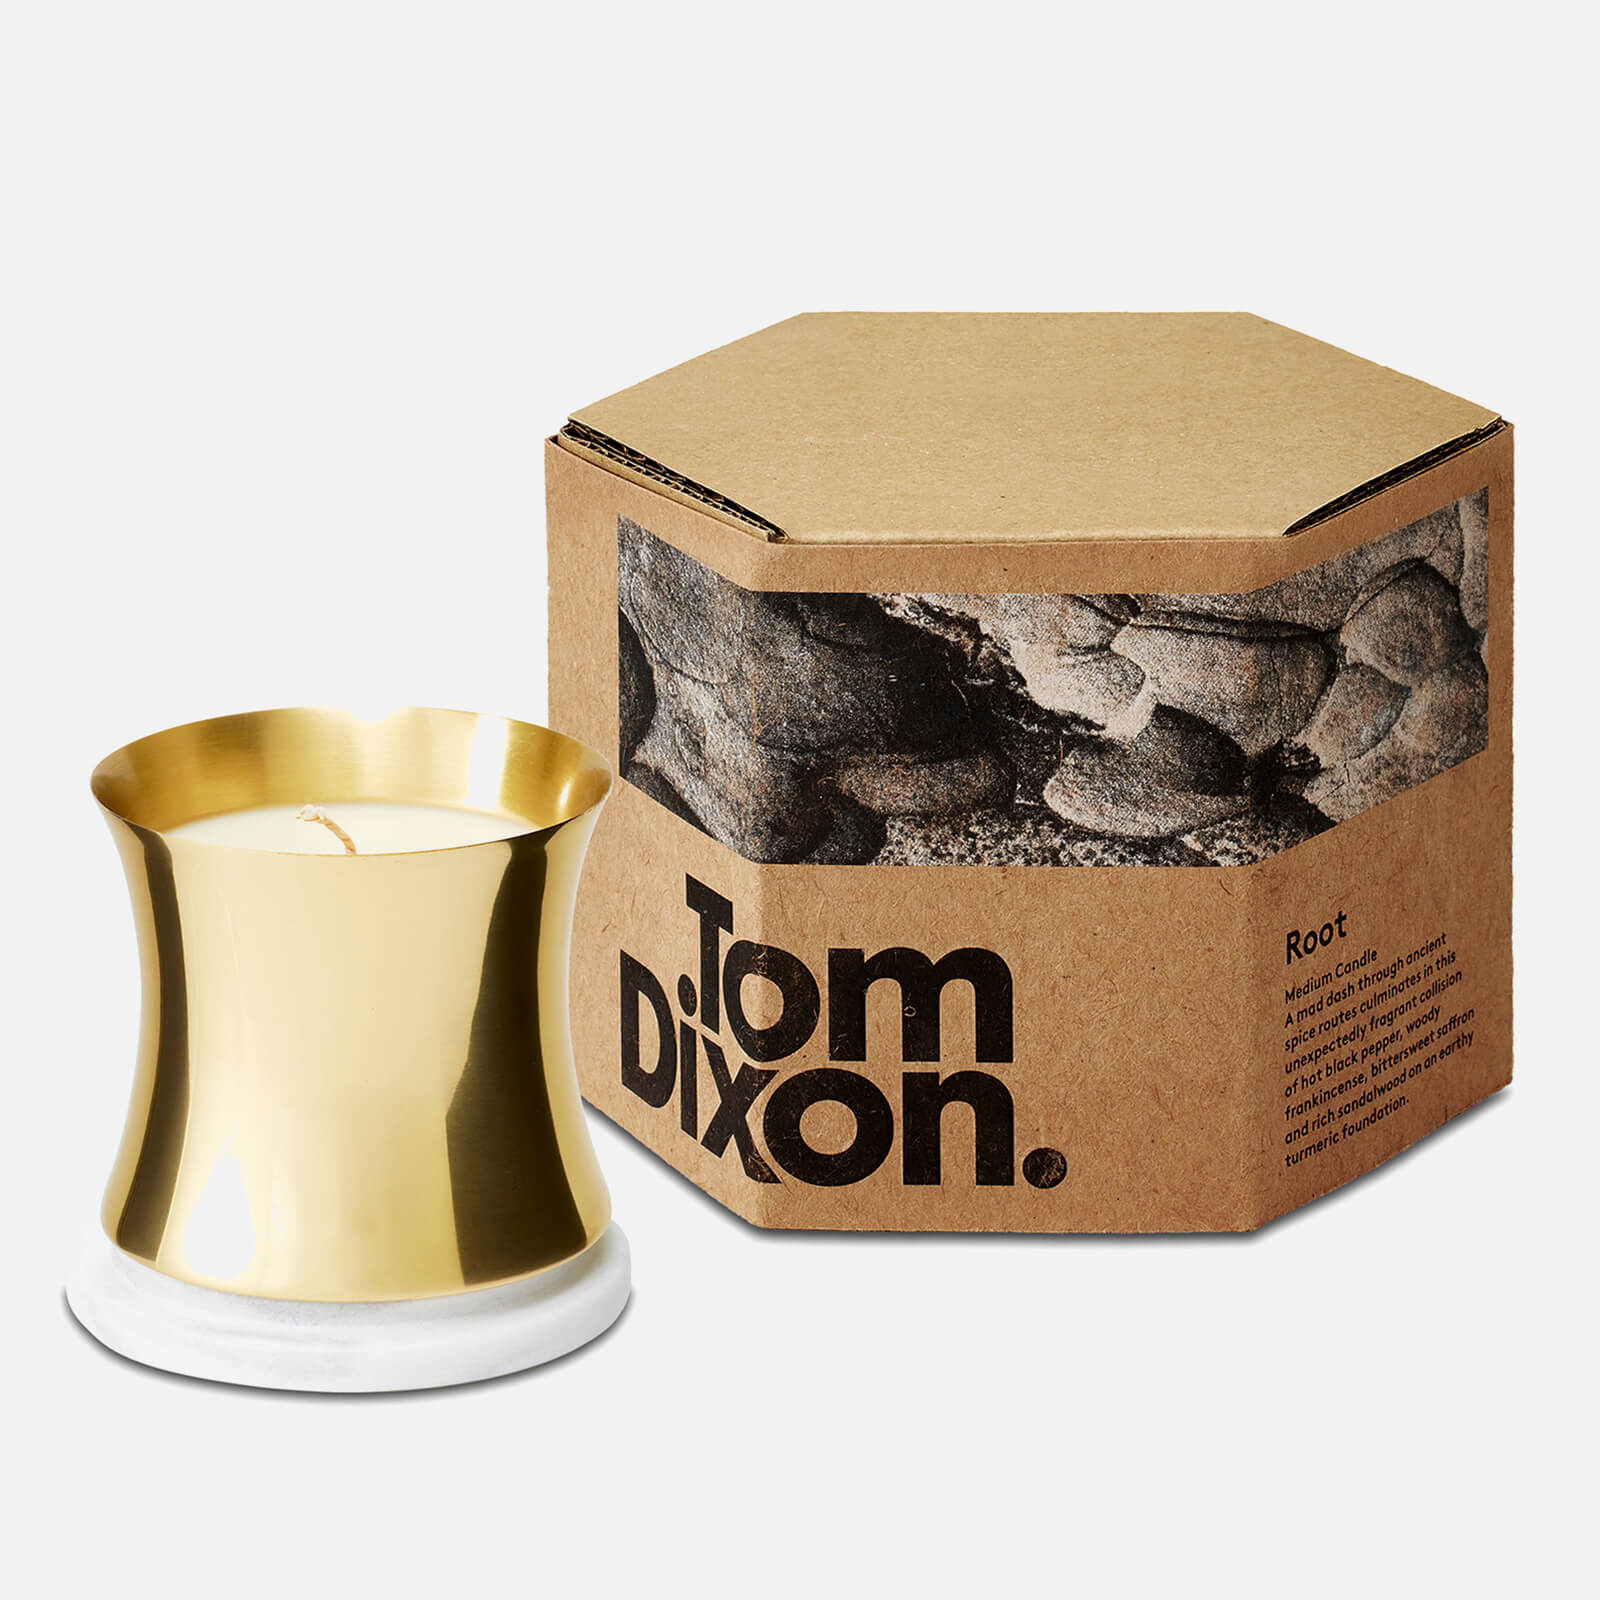 Tom Dixon Scented Eclectic Candle -Root - Large 